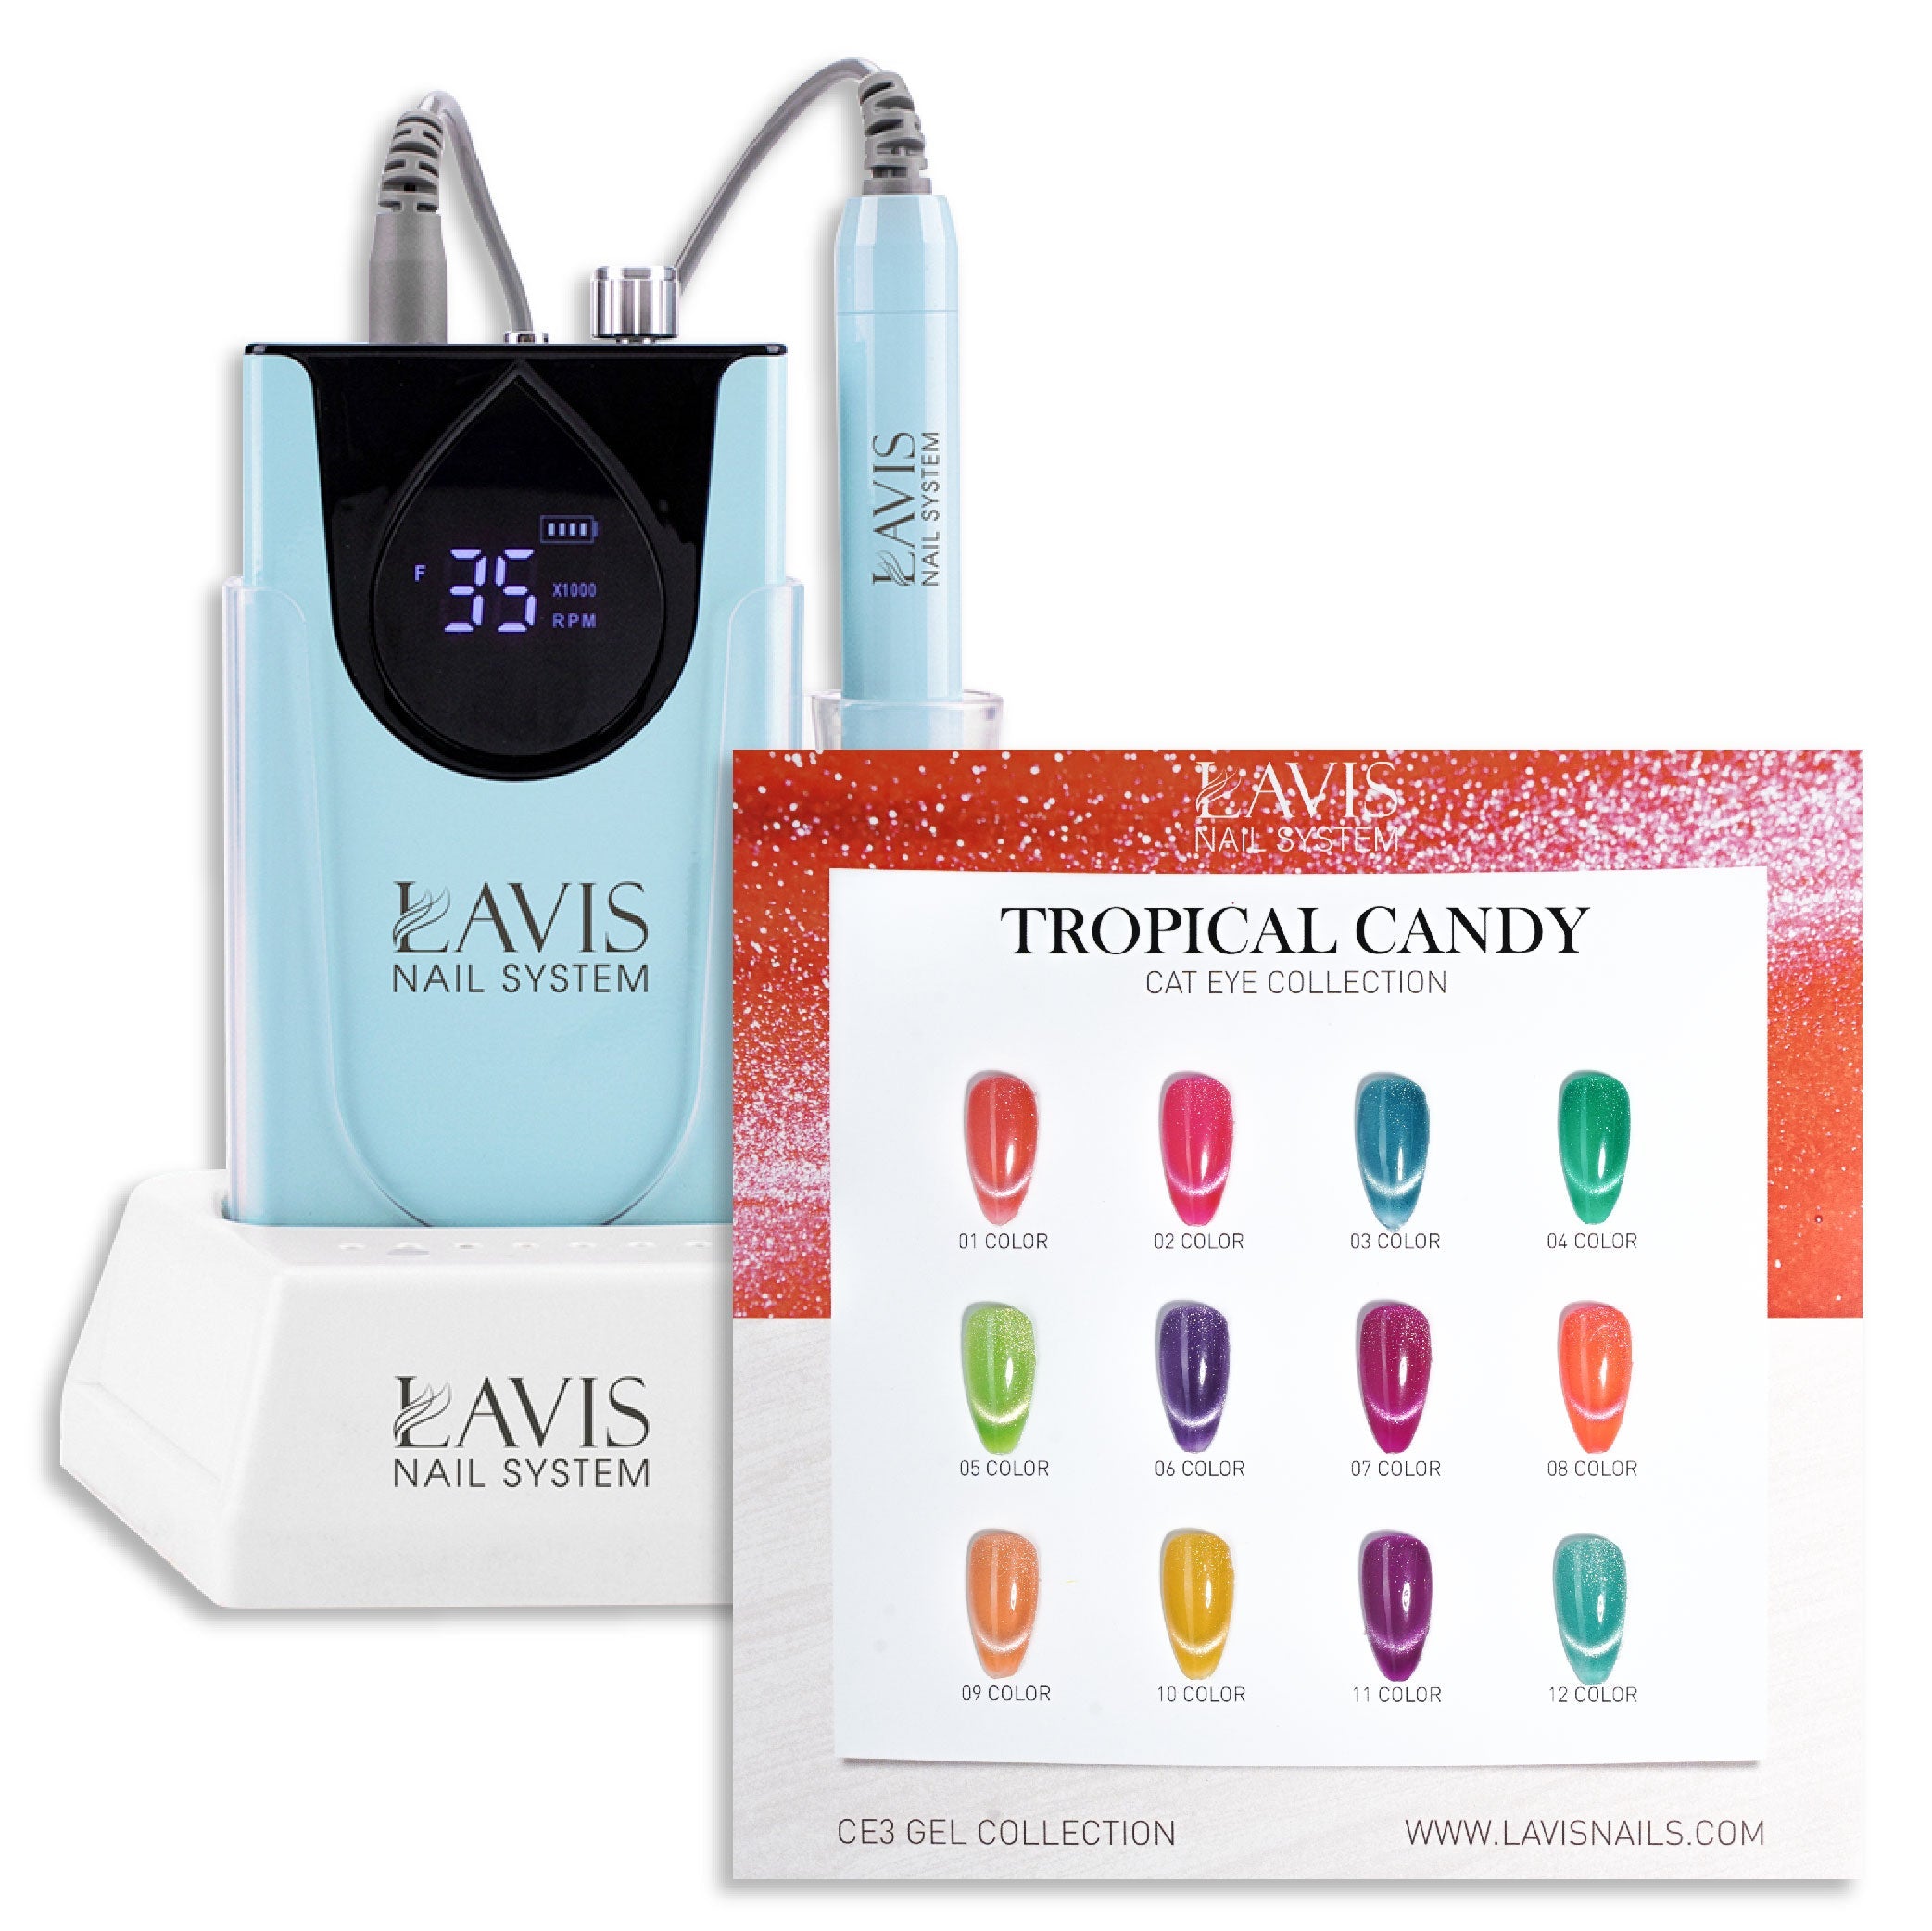 1 Lavis Nail Drill Blue & 1 Set Tropical Candy Cat Eye Collection (12 colors)